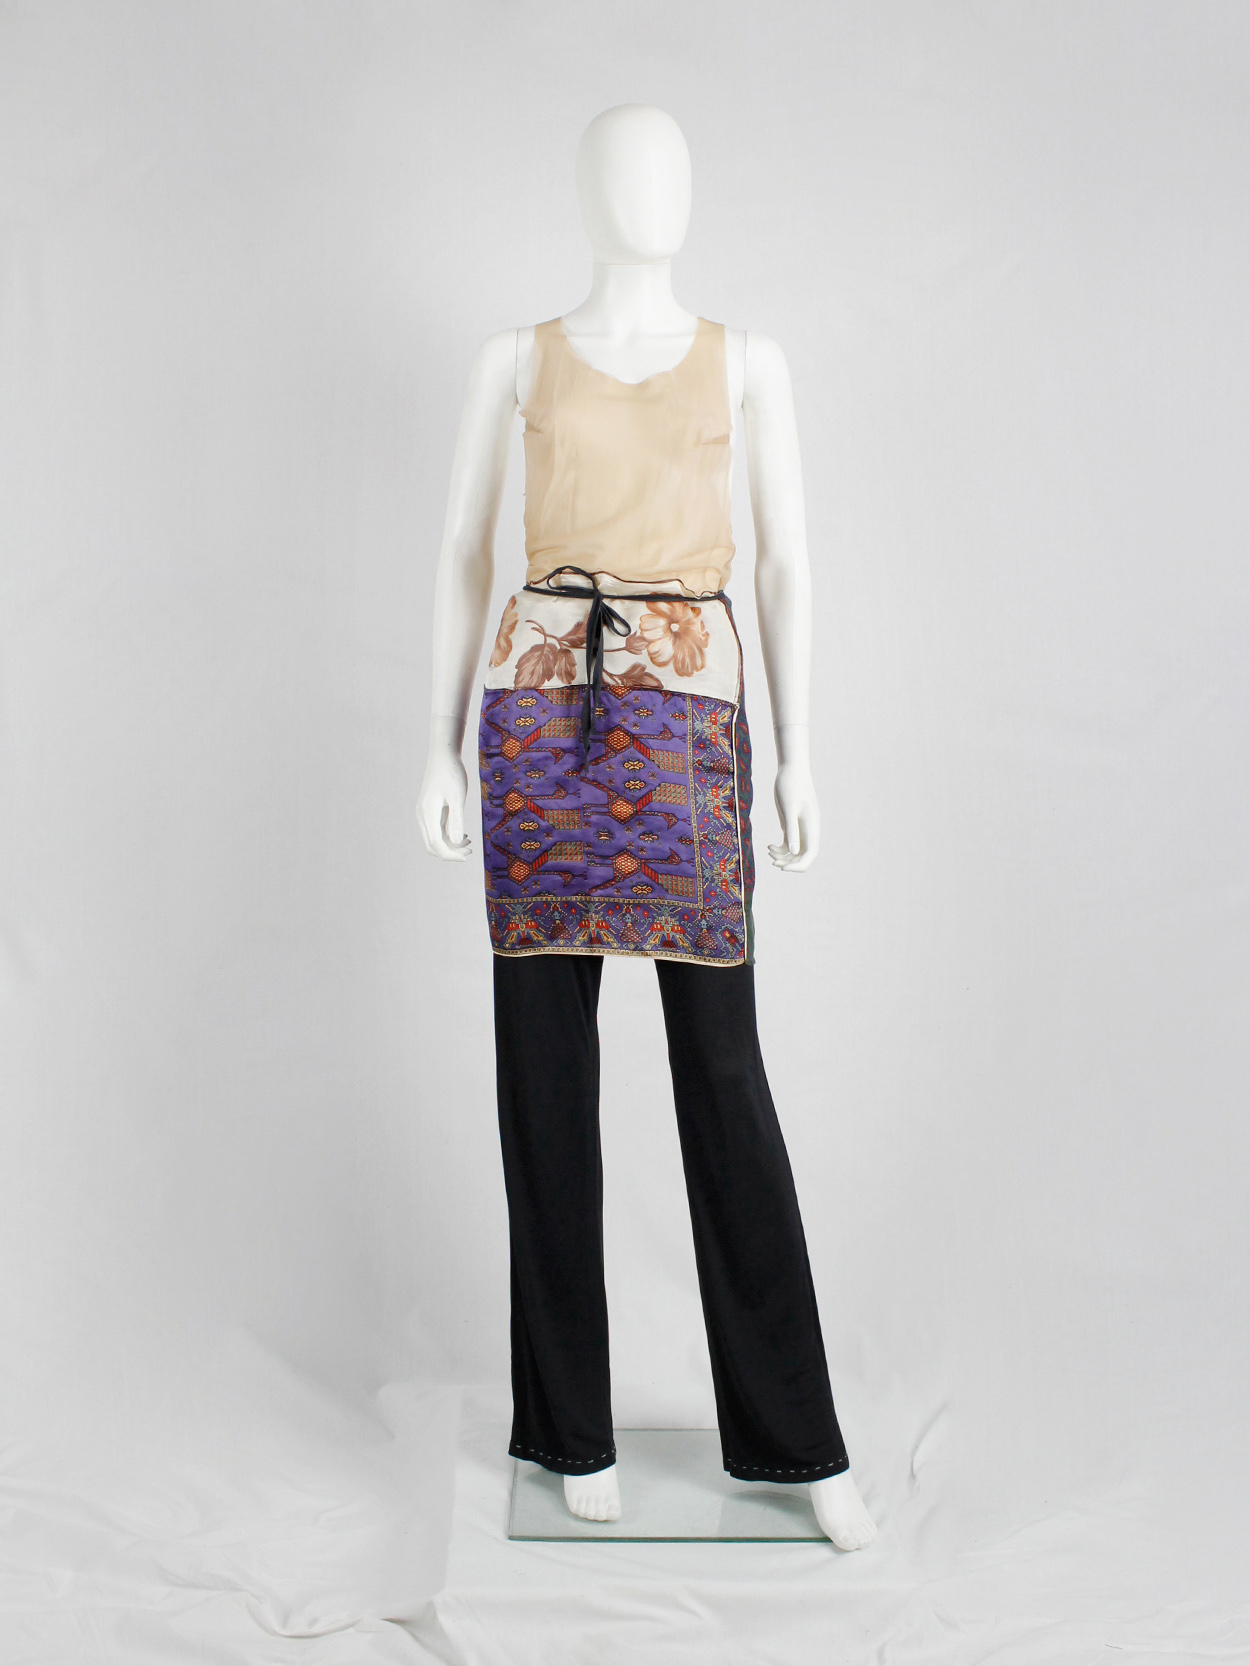 archive Maison Martin Margiela wrap skirt made of multiple scarfs sewn together spring 1992 (9)